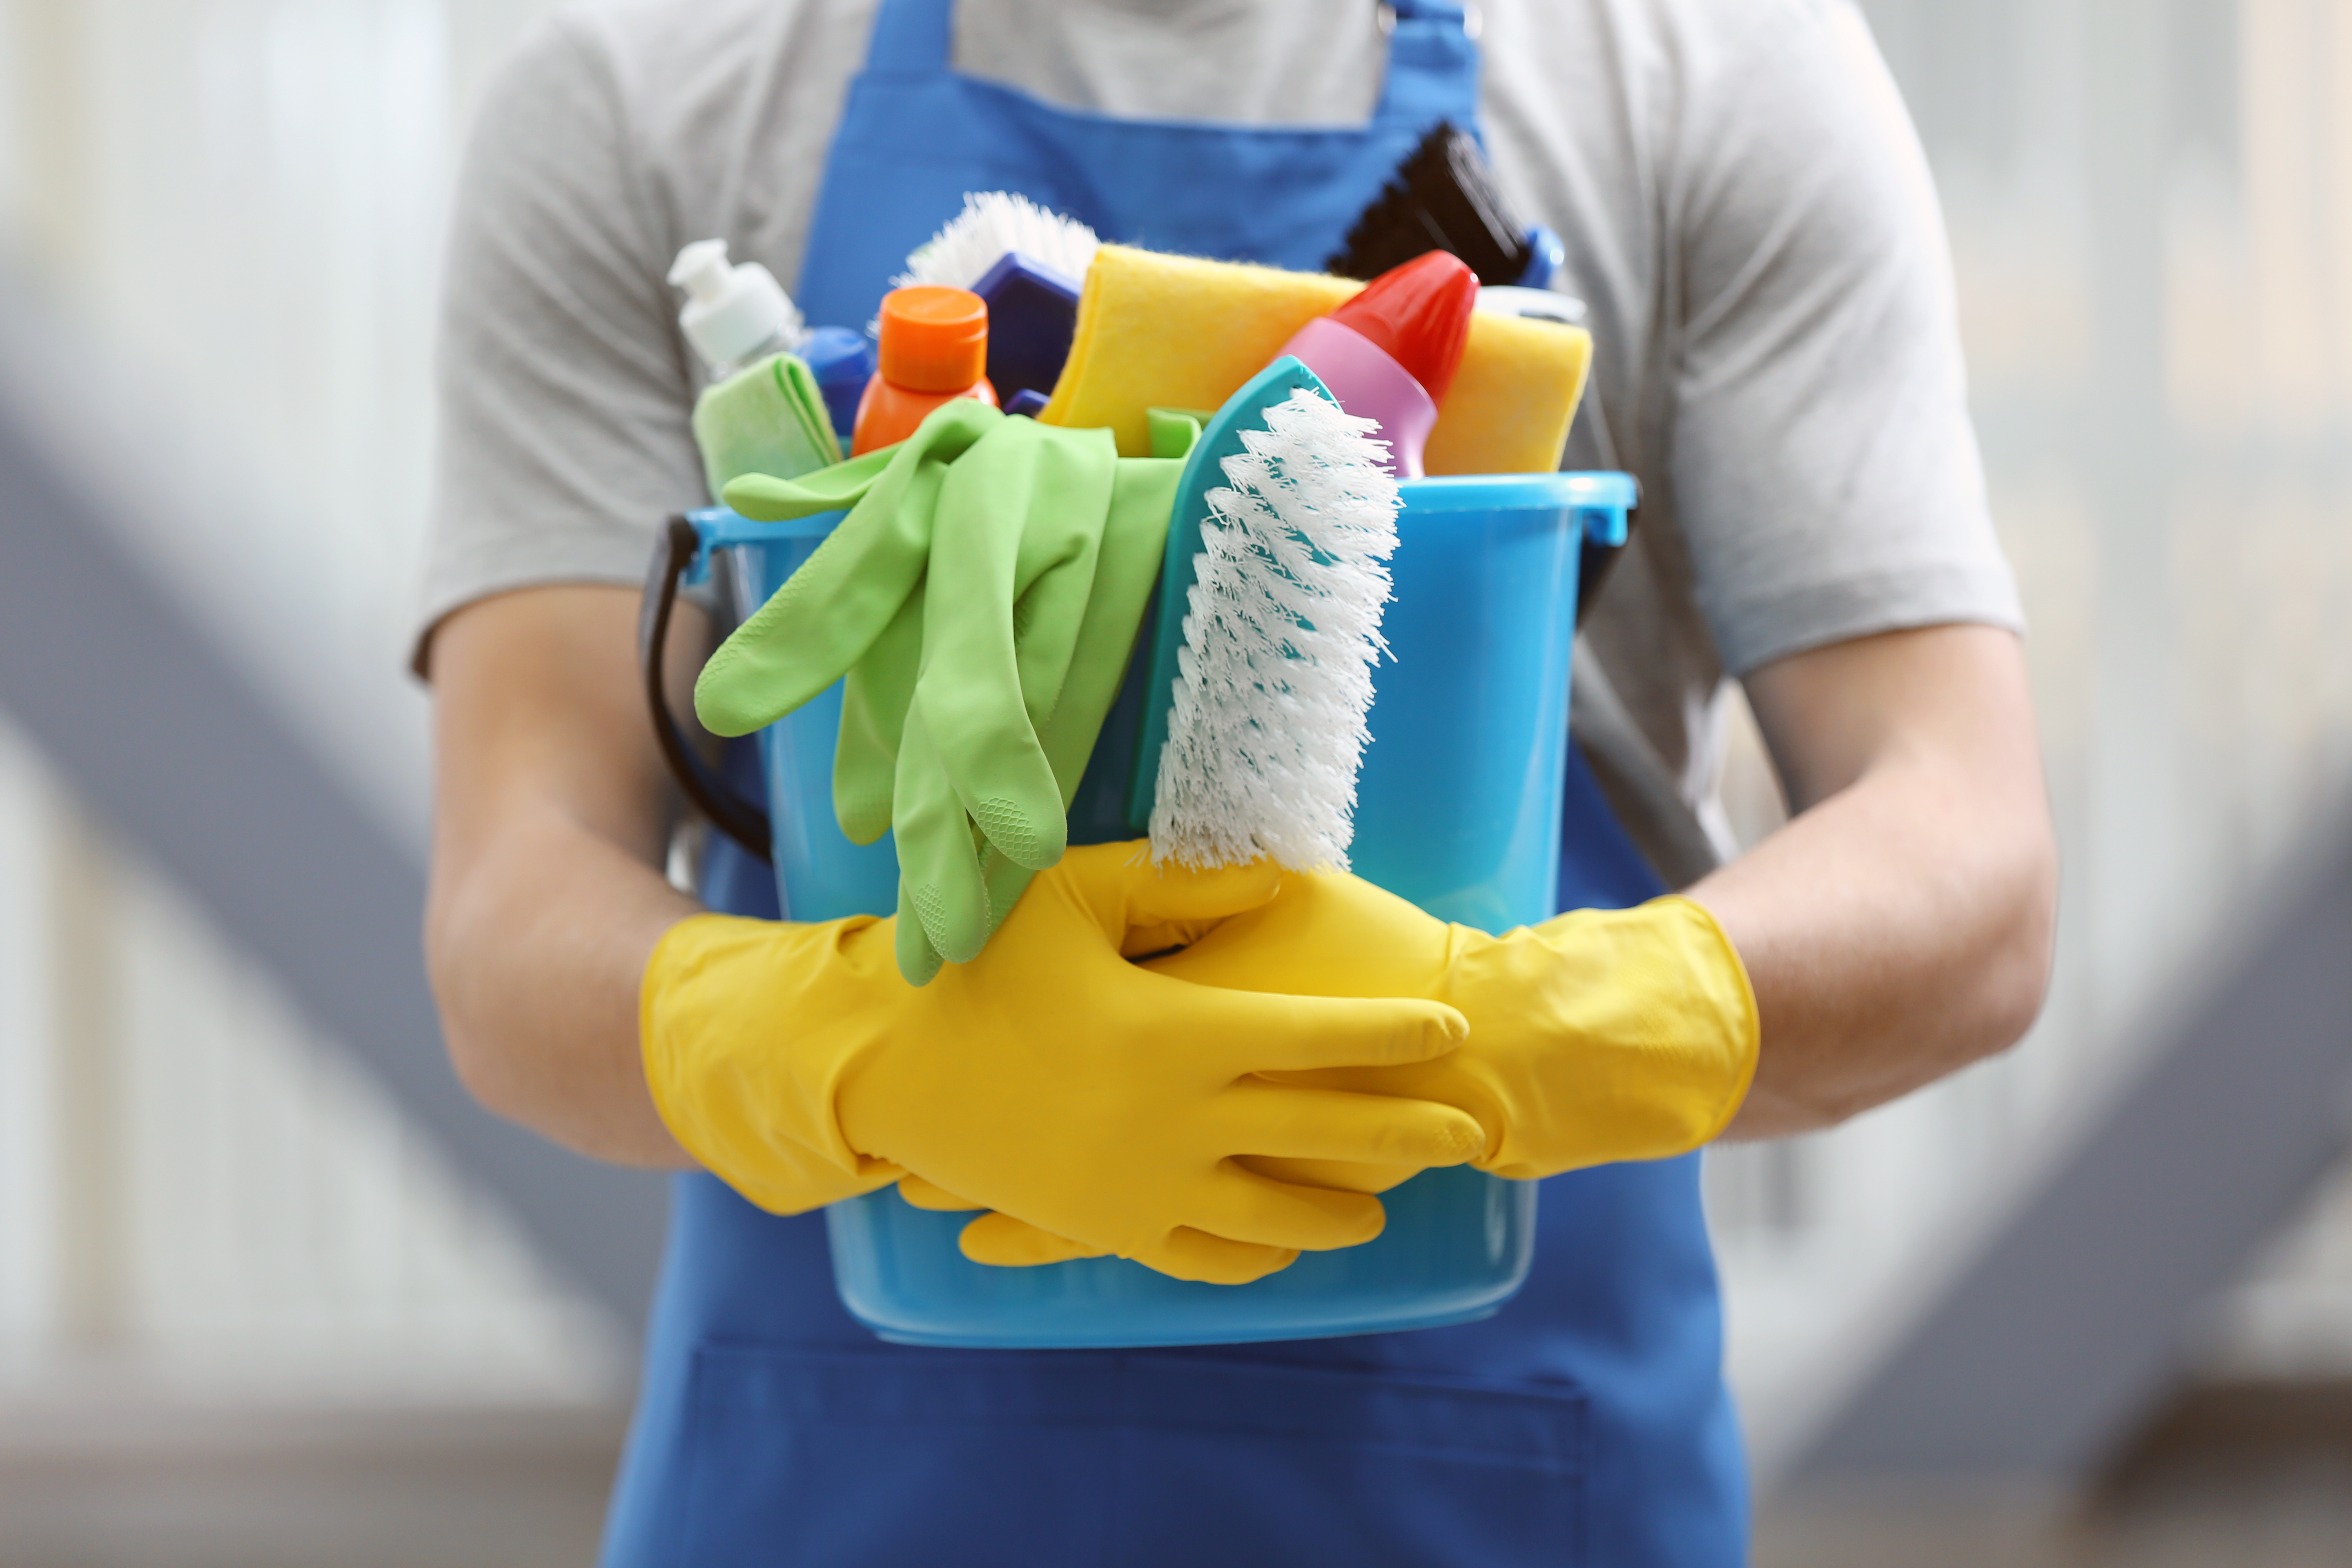 A young man carrying a bucket of cleaning supplies | Source: Shutterstock